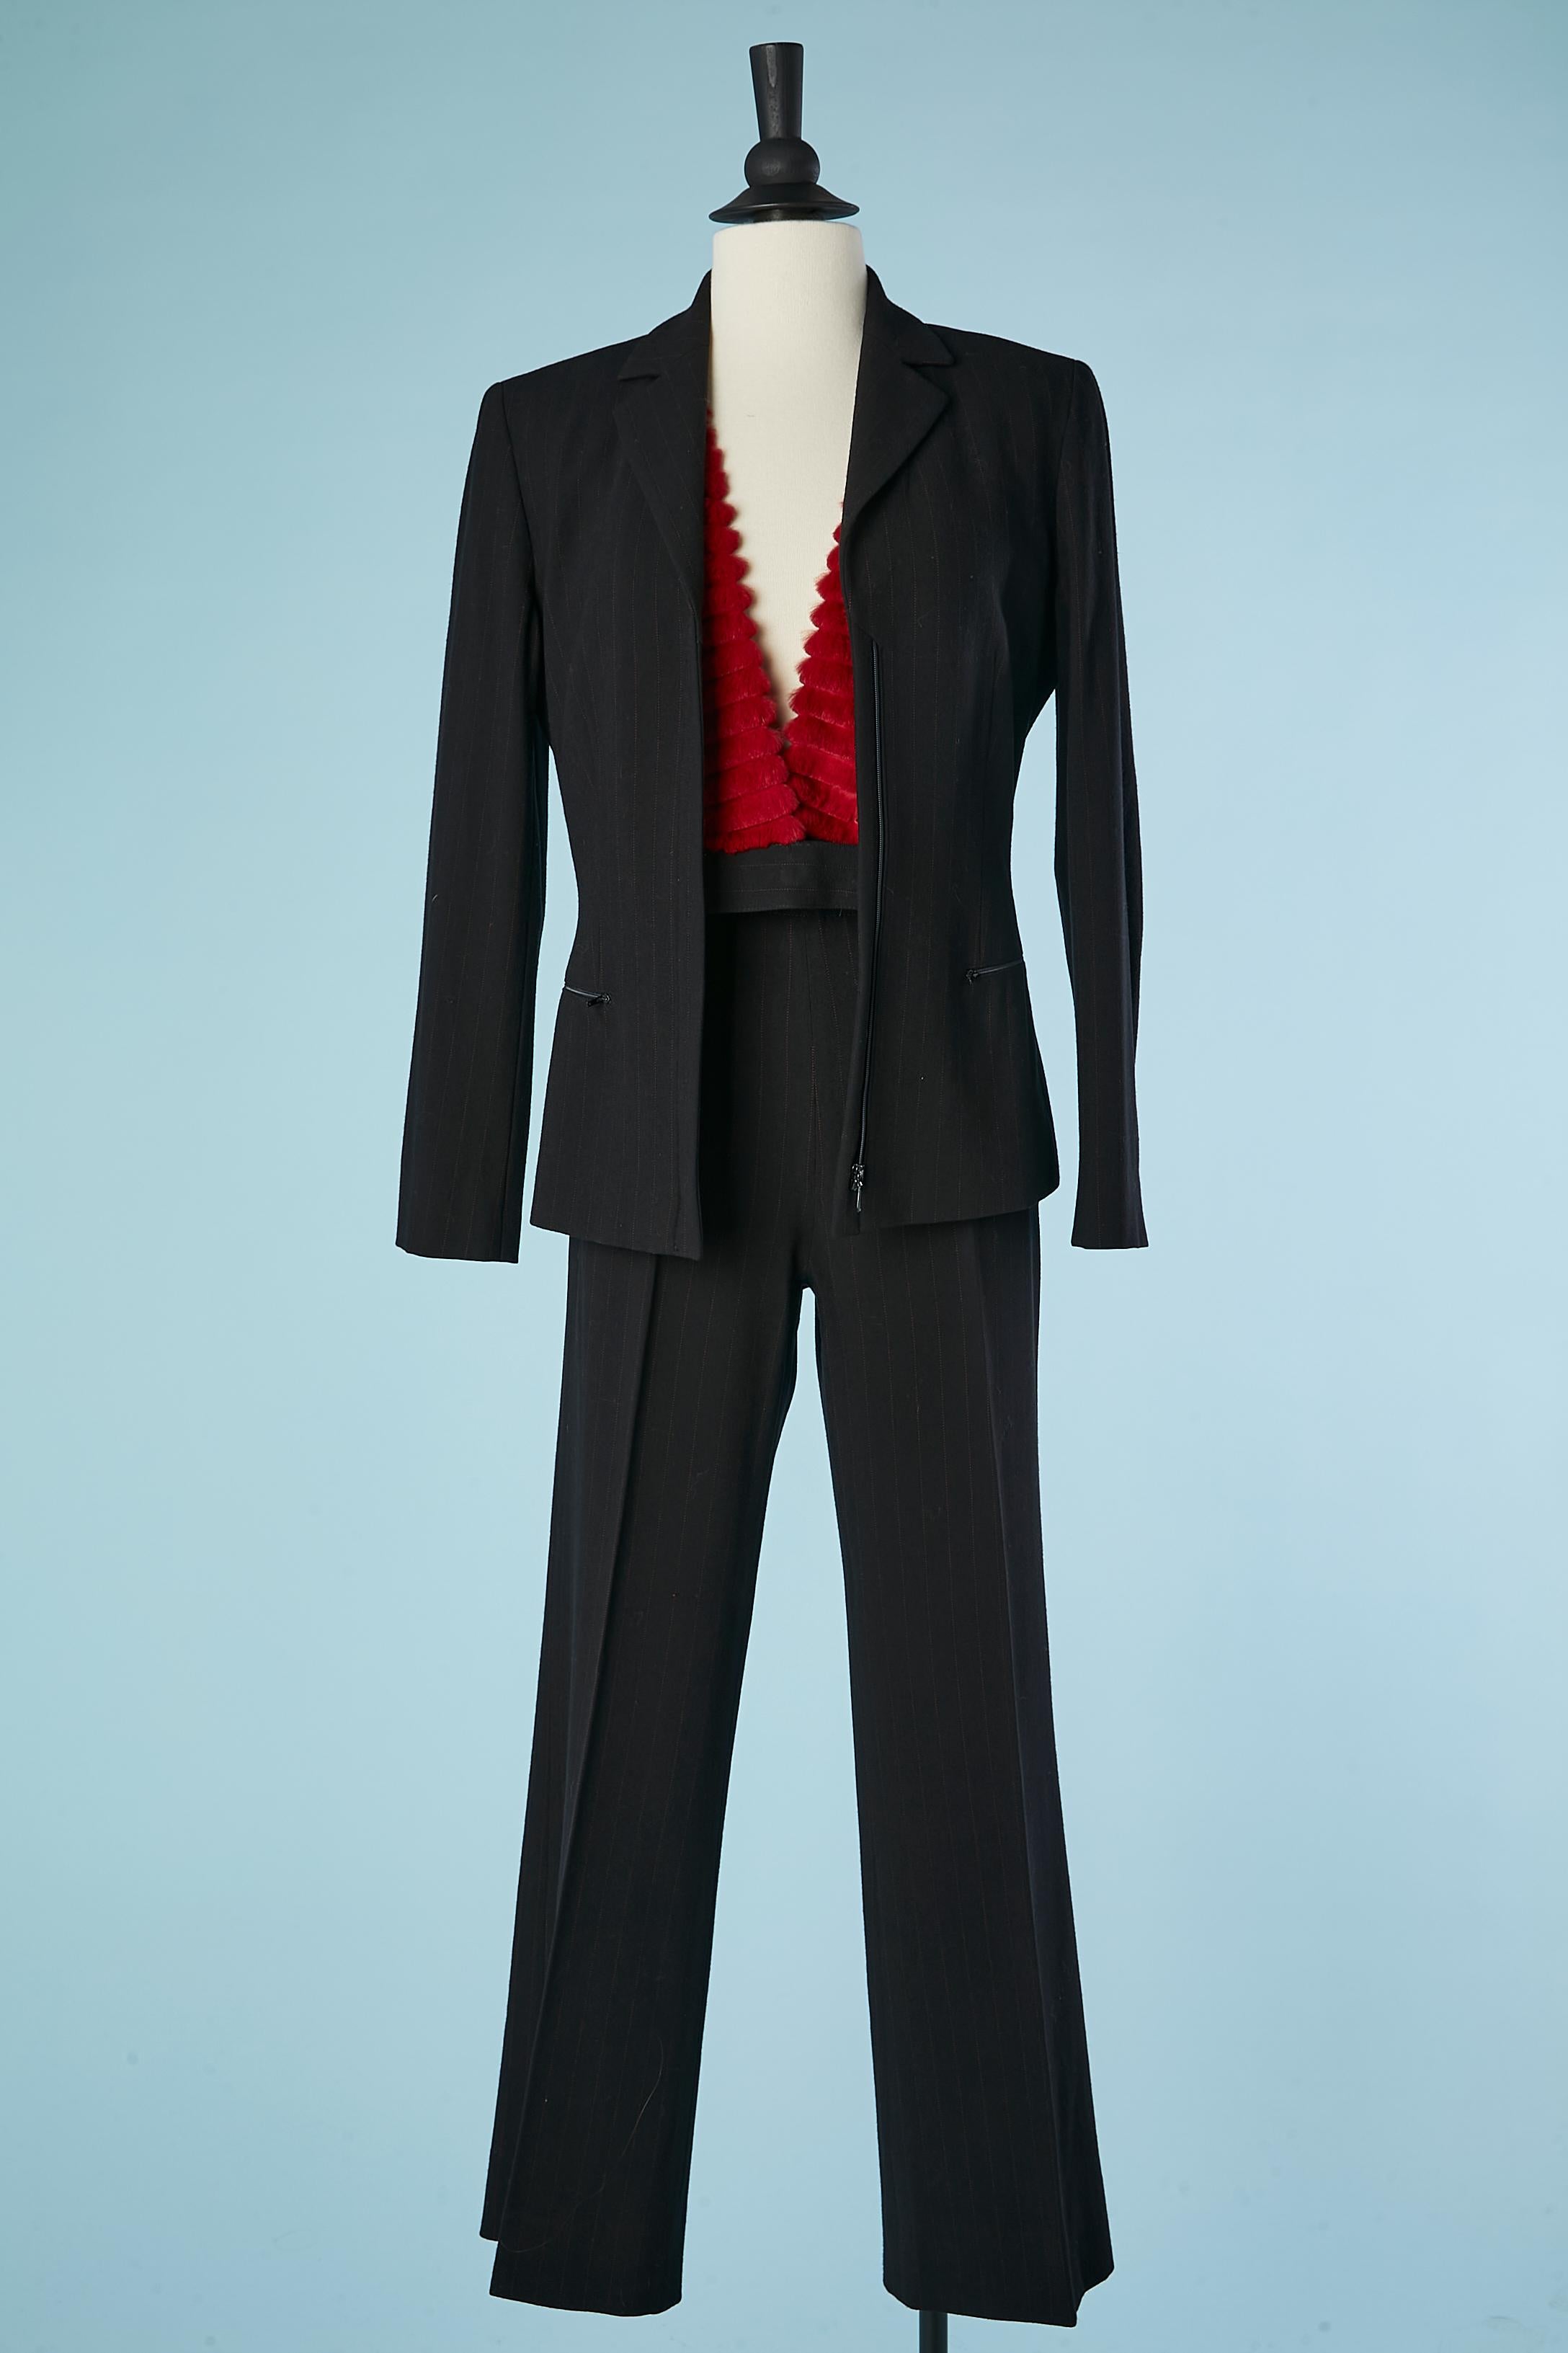 Women's Black wool and red pin-stripe trouser-suit and fur vest Gianfranco Ferré Studio